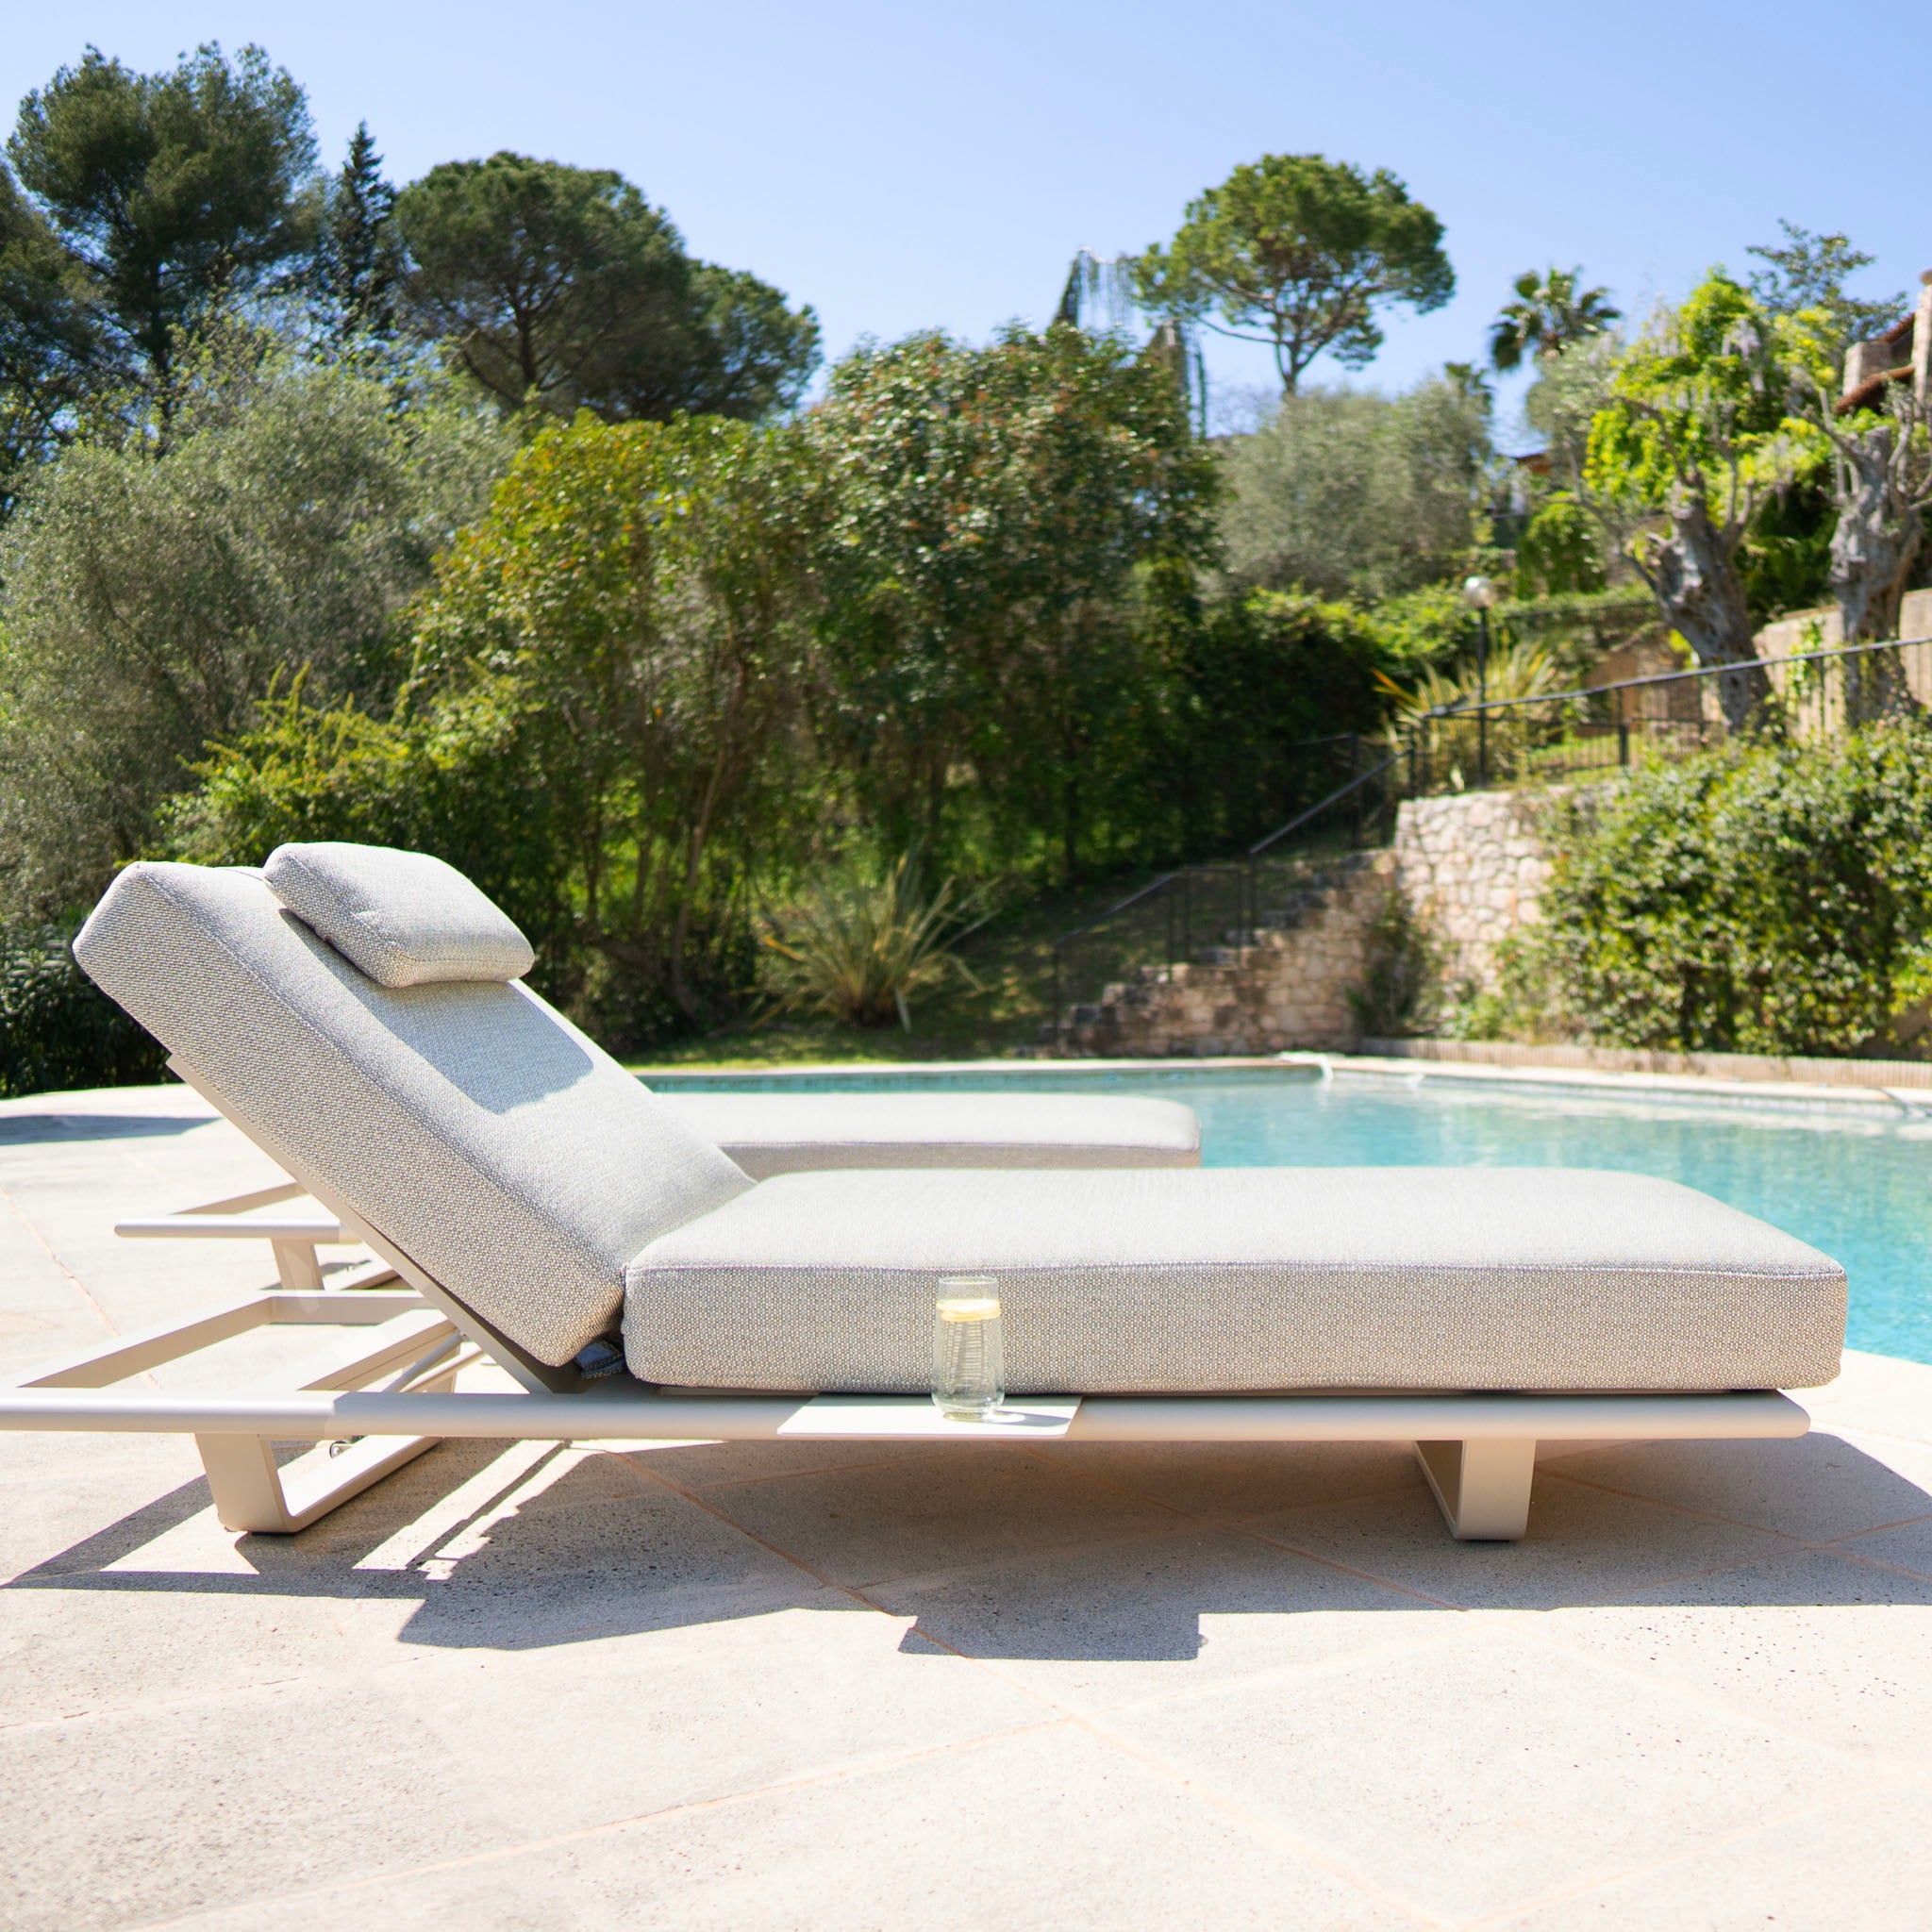 Hatia Single Sun Lounger with Side Table in Latte